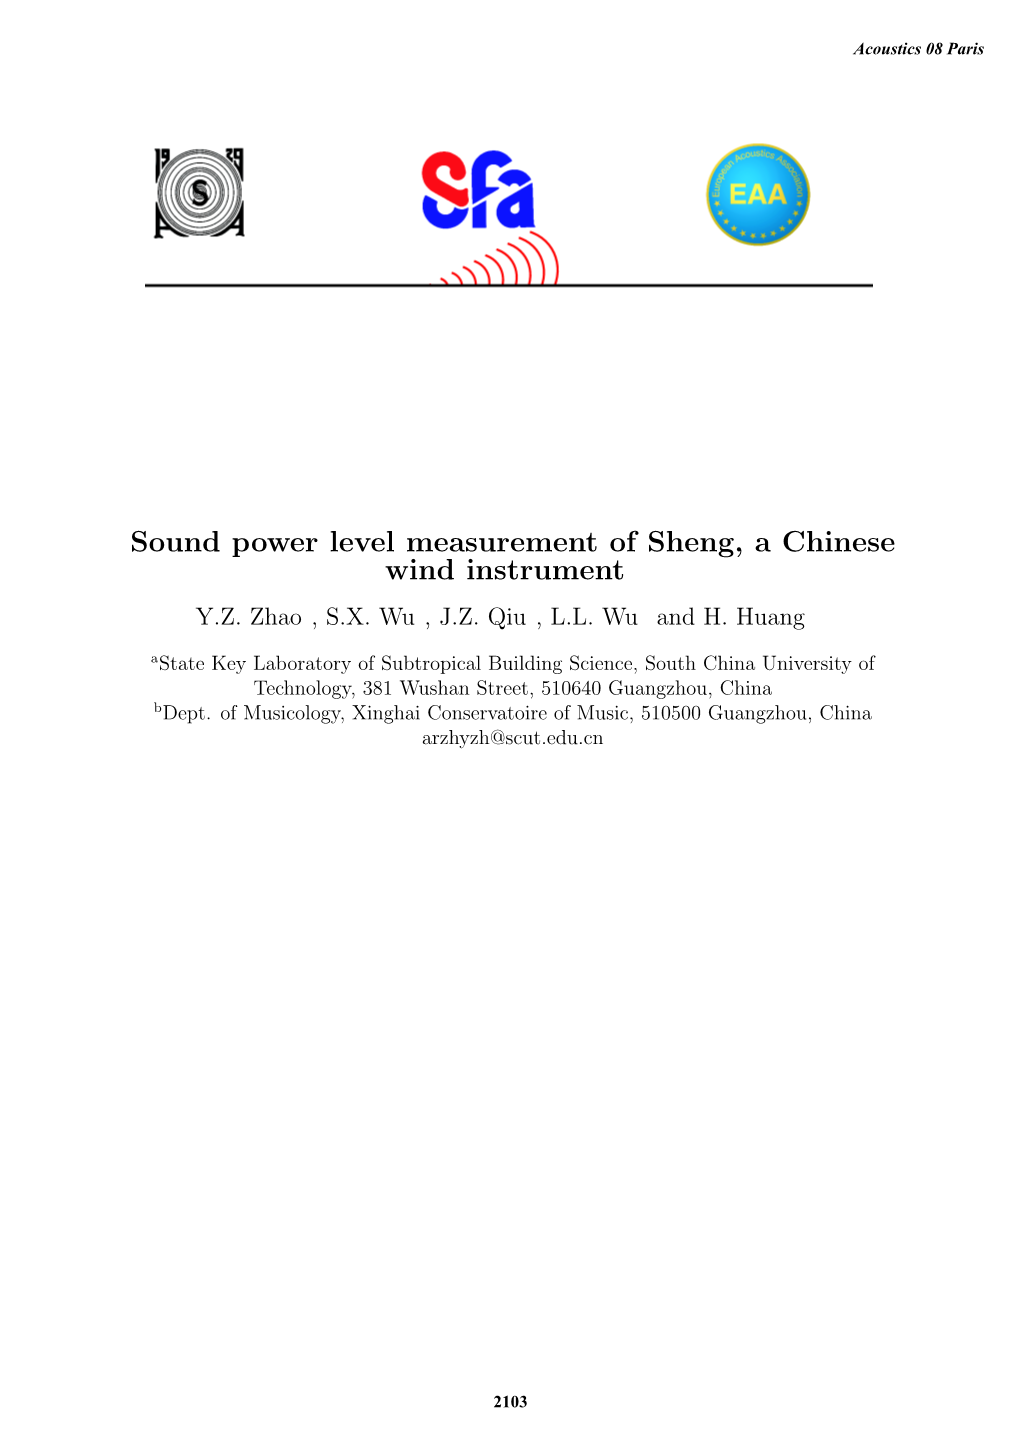 Sound Power Level Measurement of Sheng, a Chinese Wind Instrument Y.Z